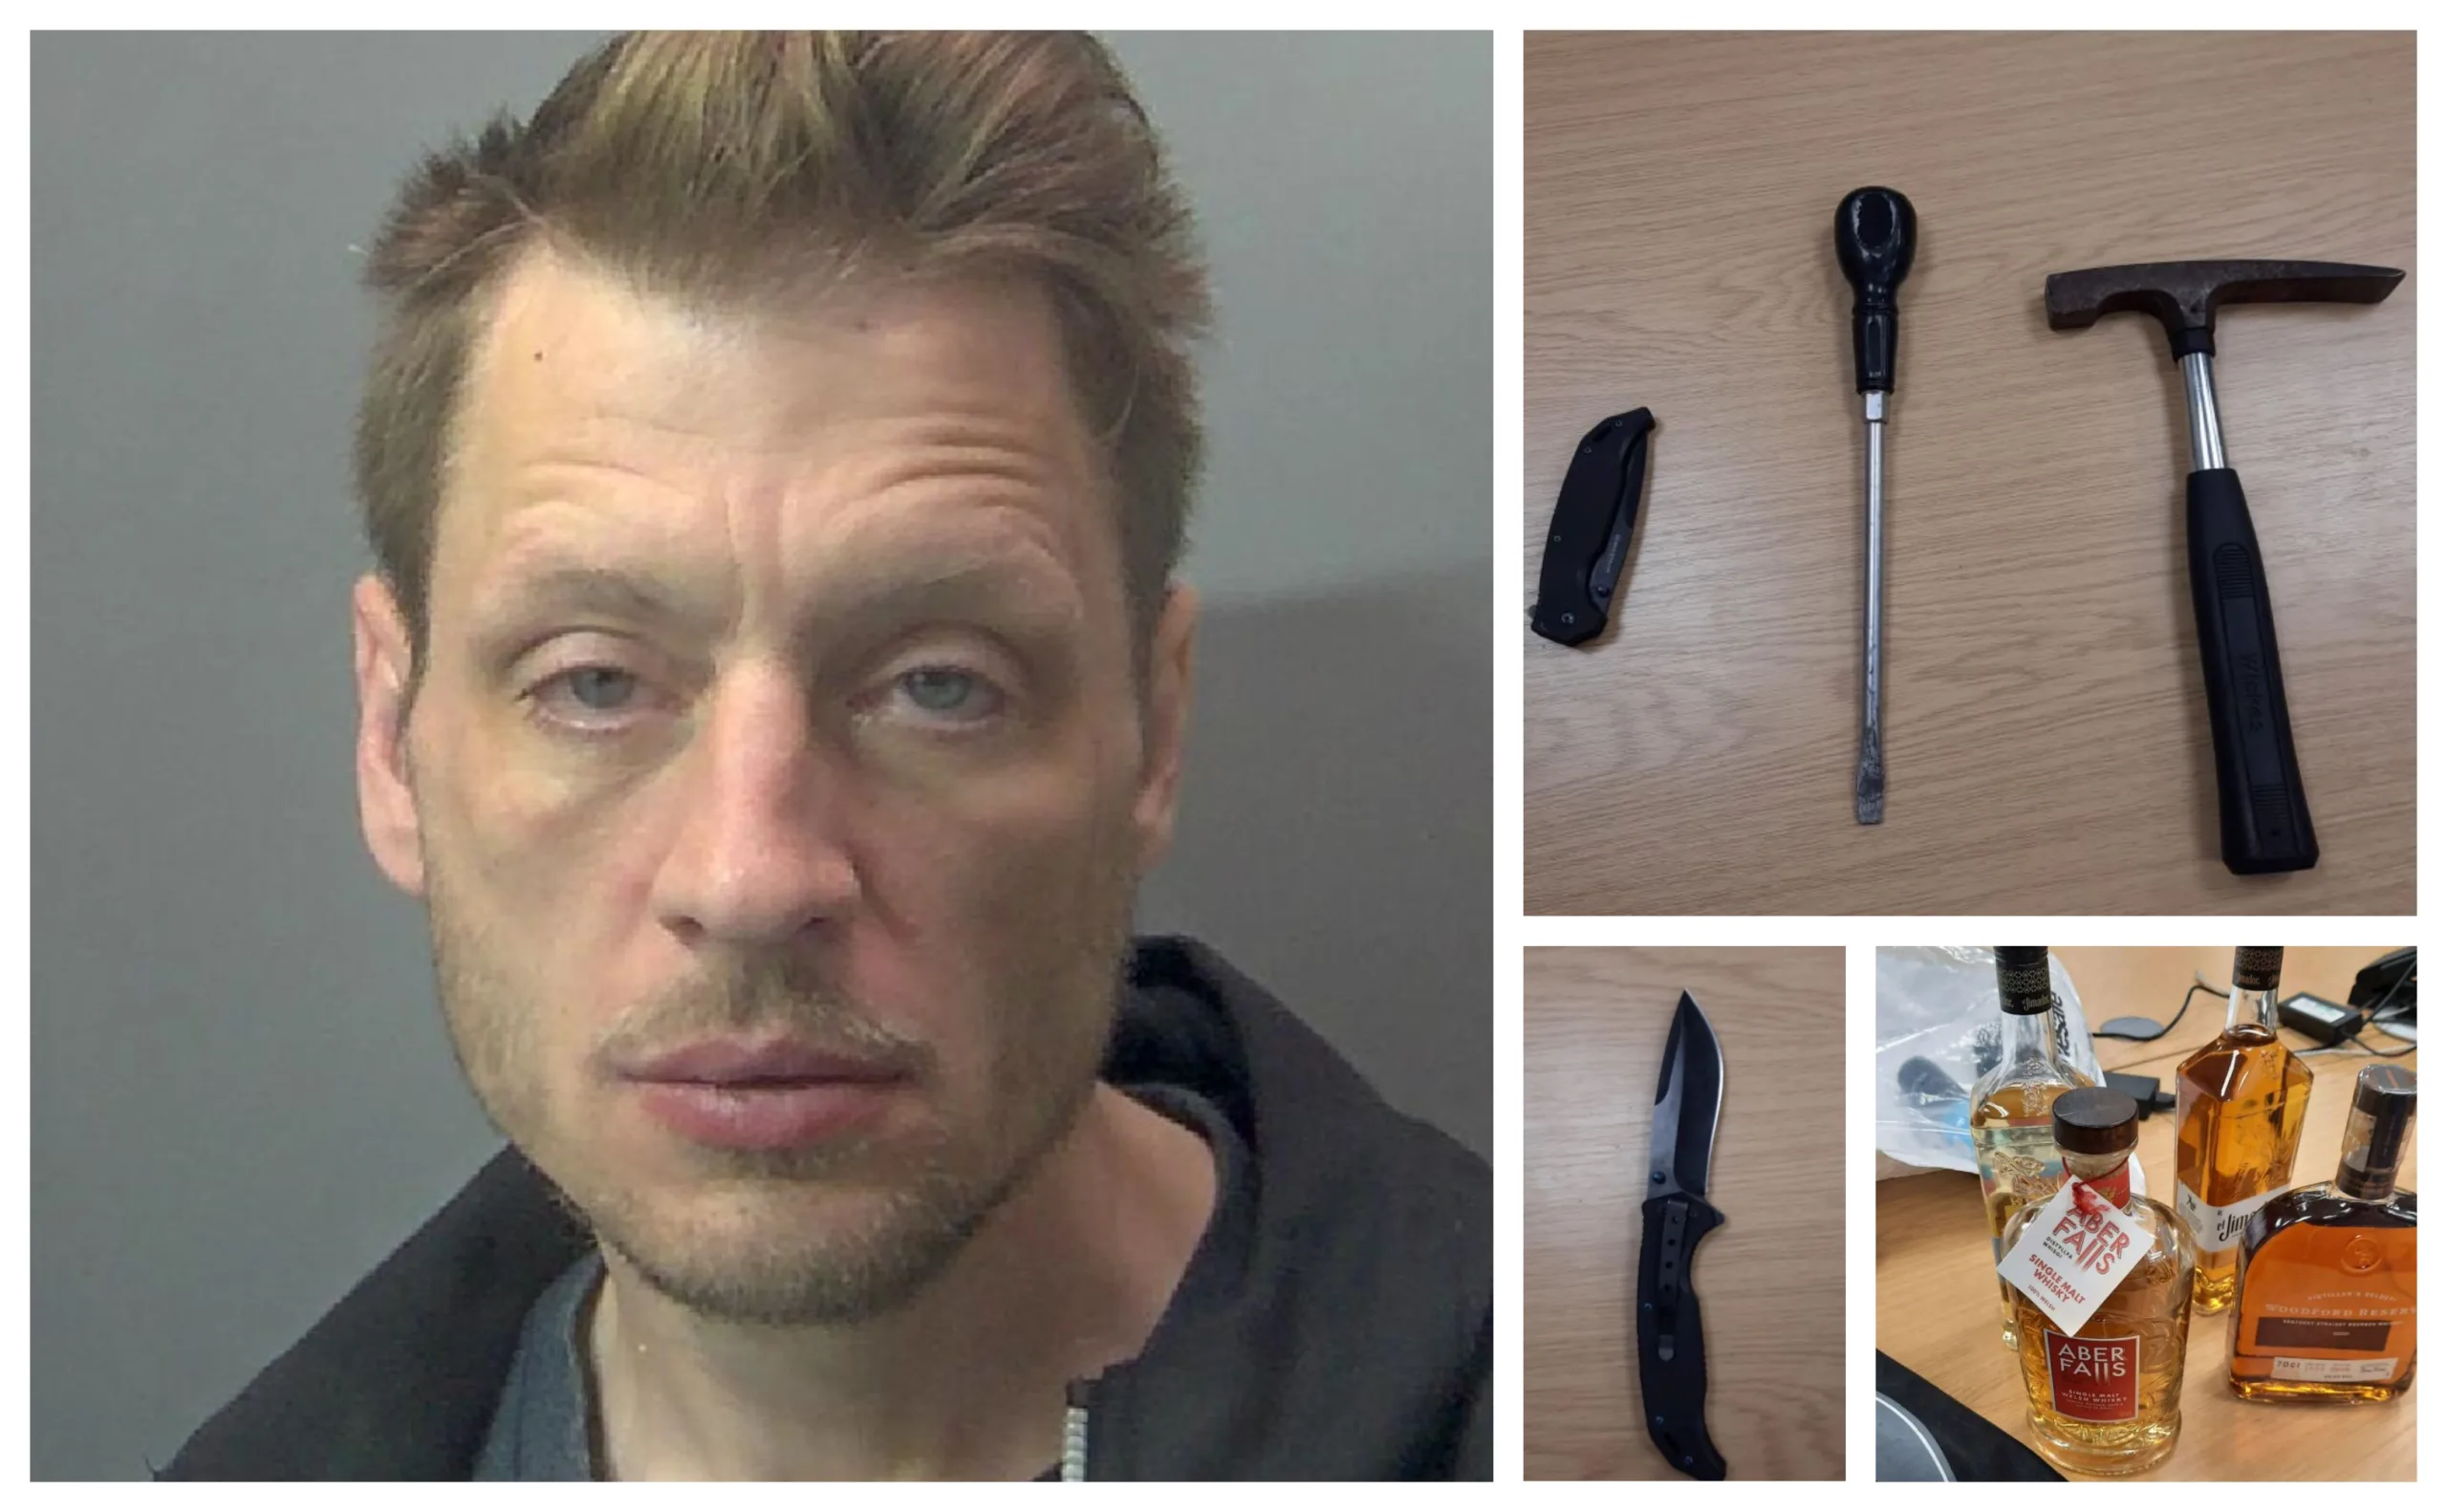 Stephen Whittington, 41, broke into the Granary, in Ham Lane, Peterborough but was caught by police. He dropped a bag containing a hammer, screwdriver and four bottles of spirits and had a knife in his pocket.